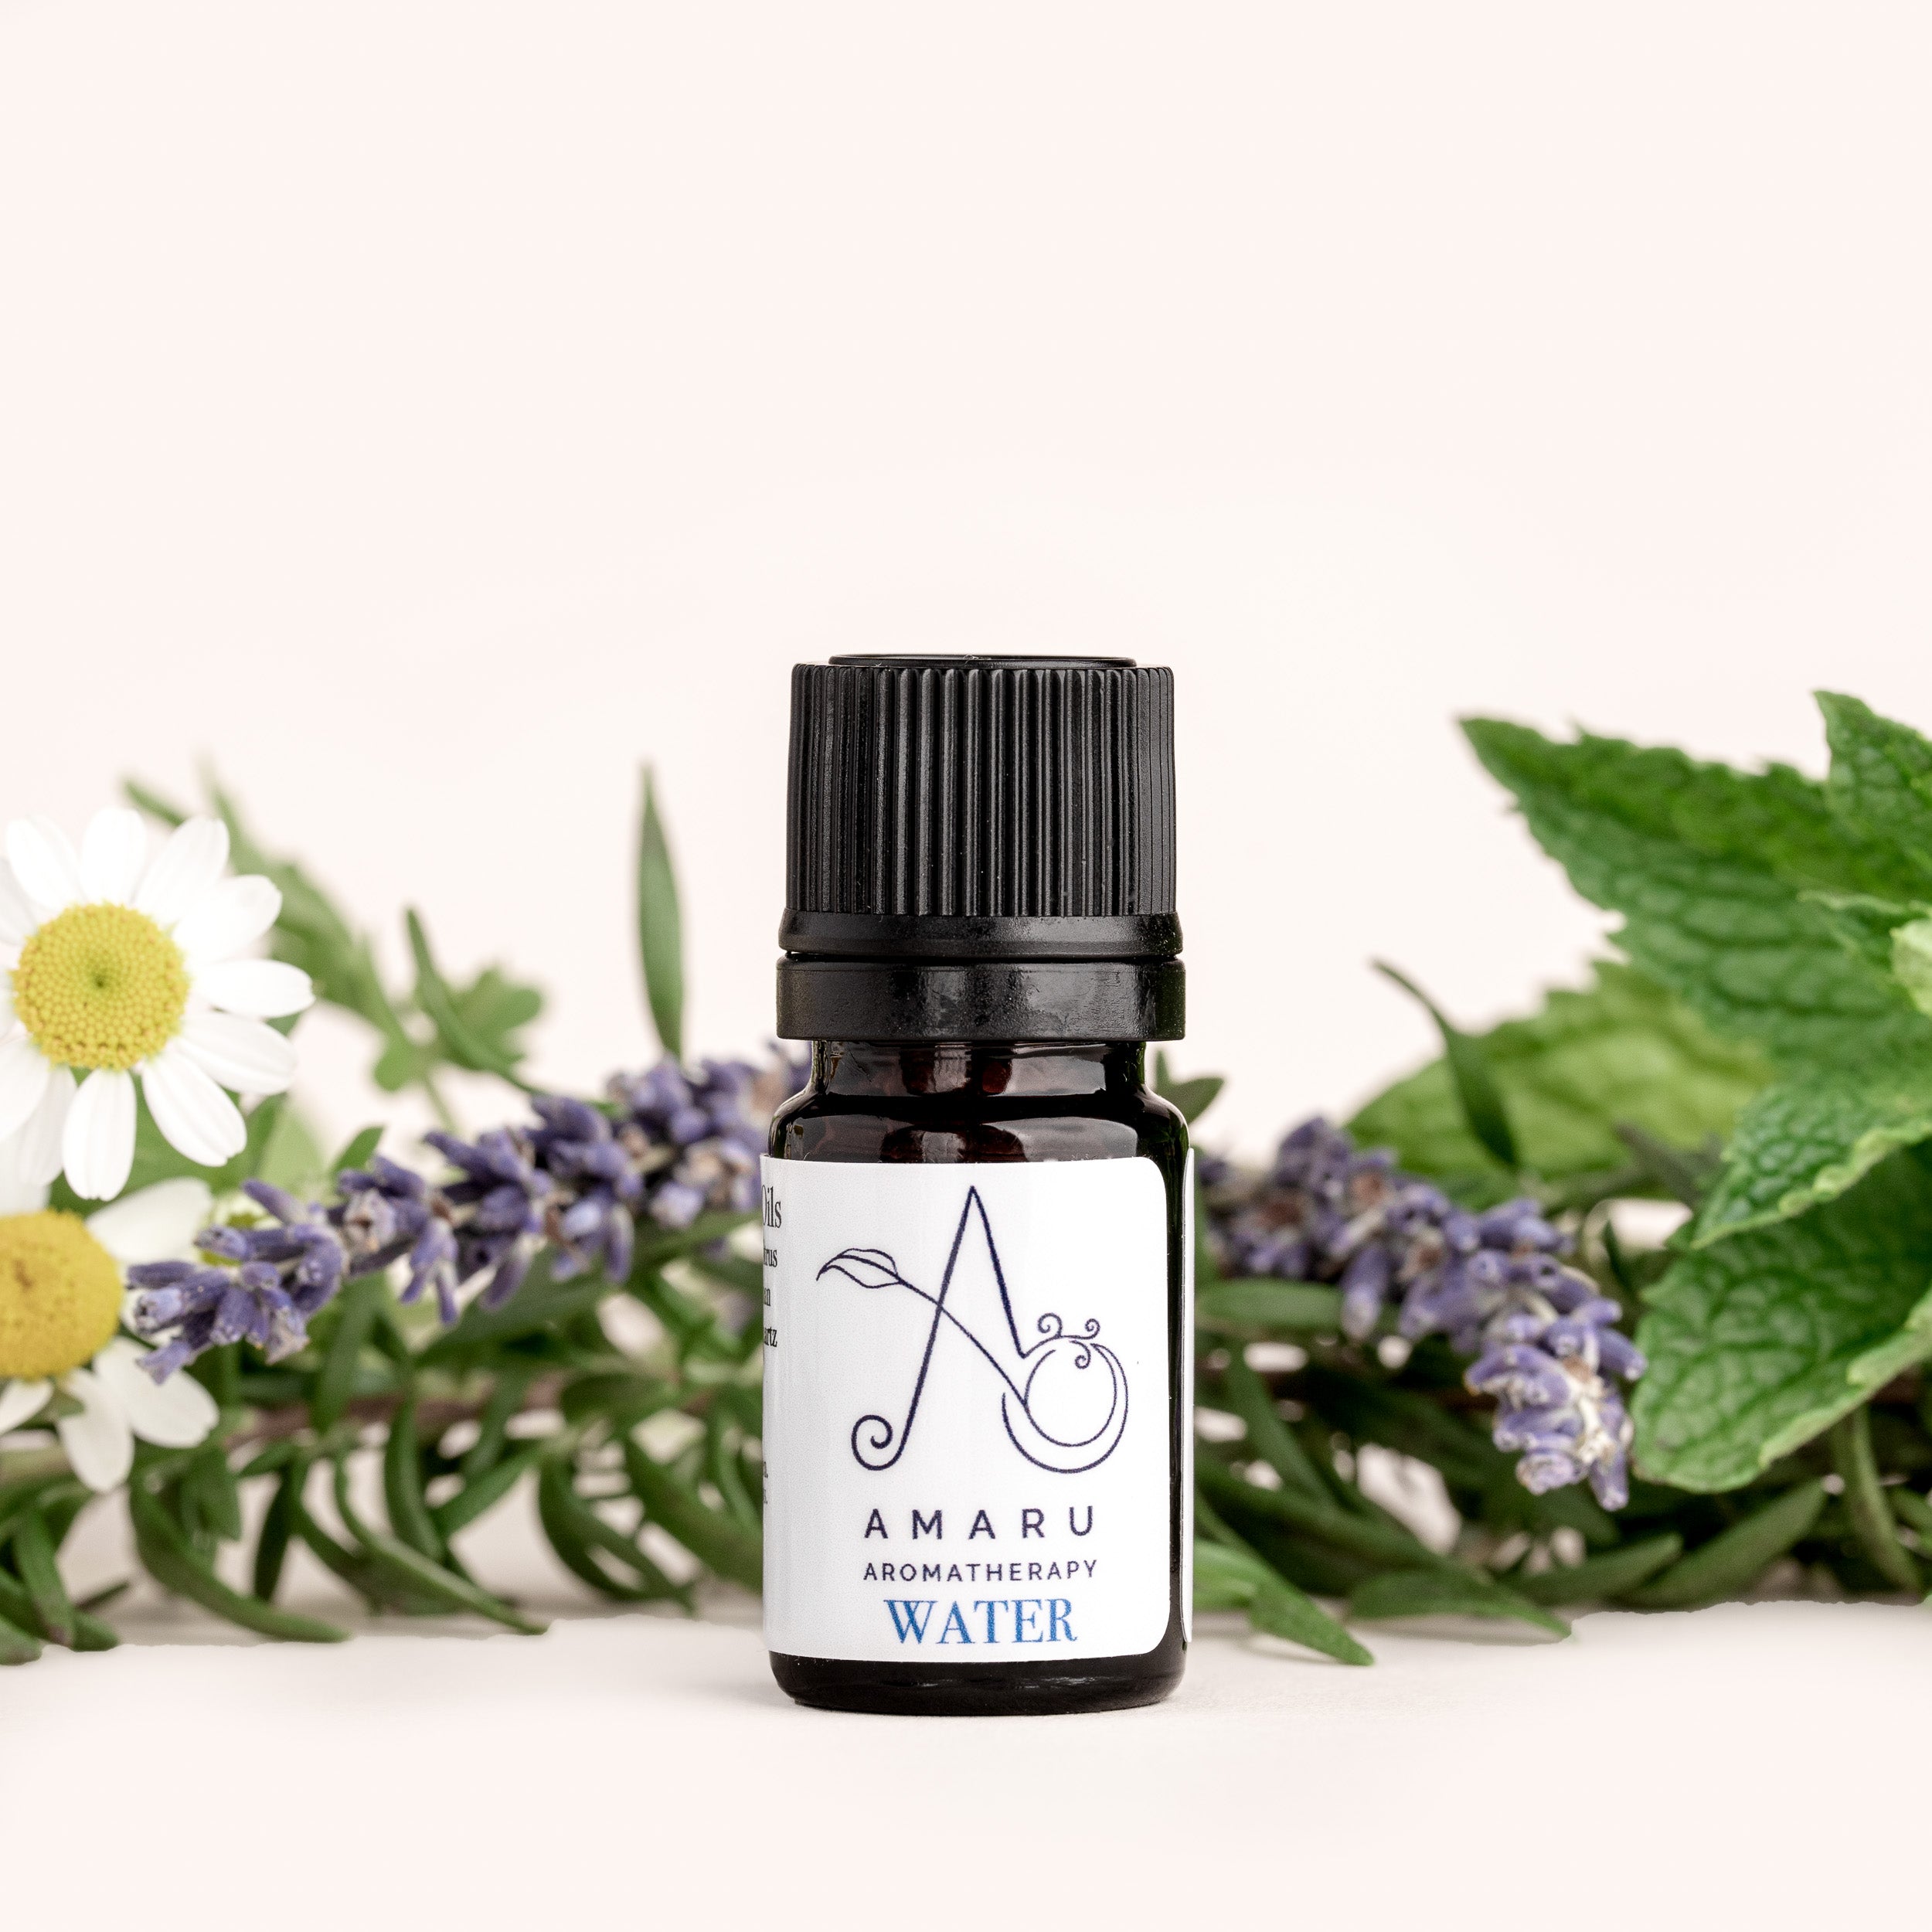 Calming & Relaxing Essential Oil Water: A Soothing Aromatherapy Blend for Self-Care